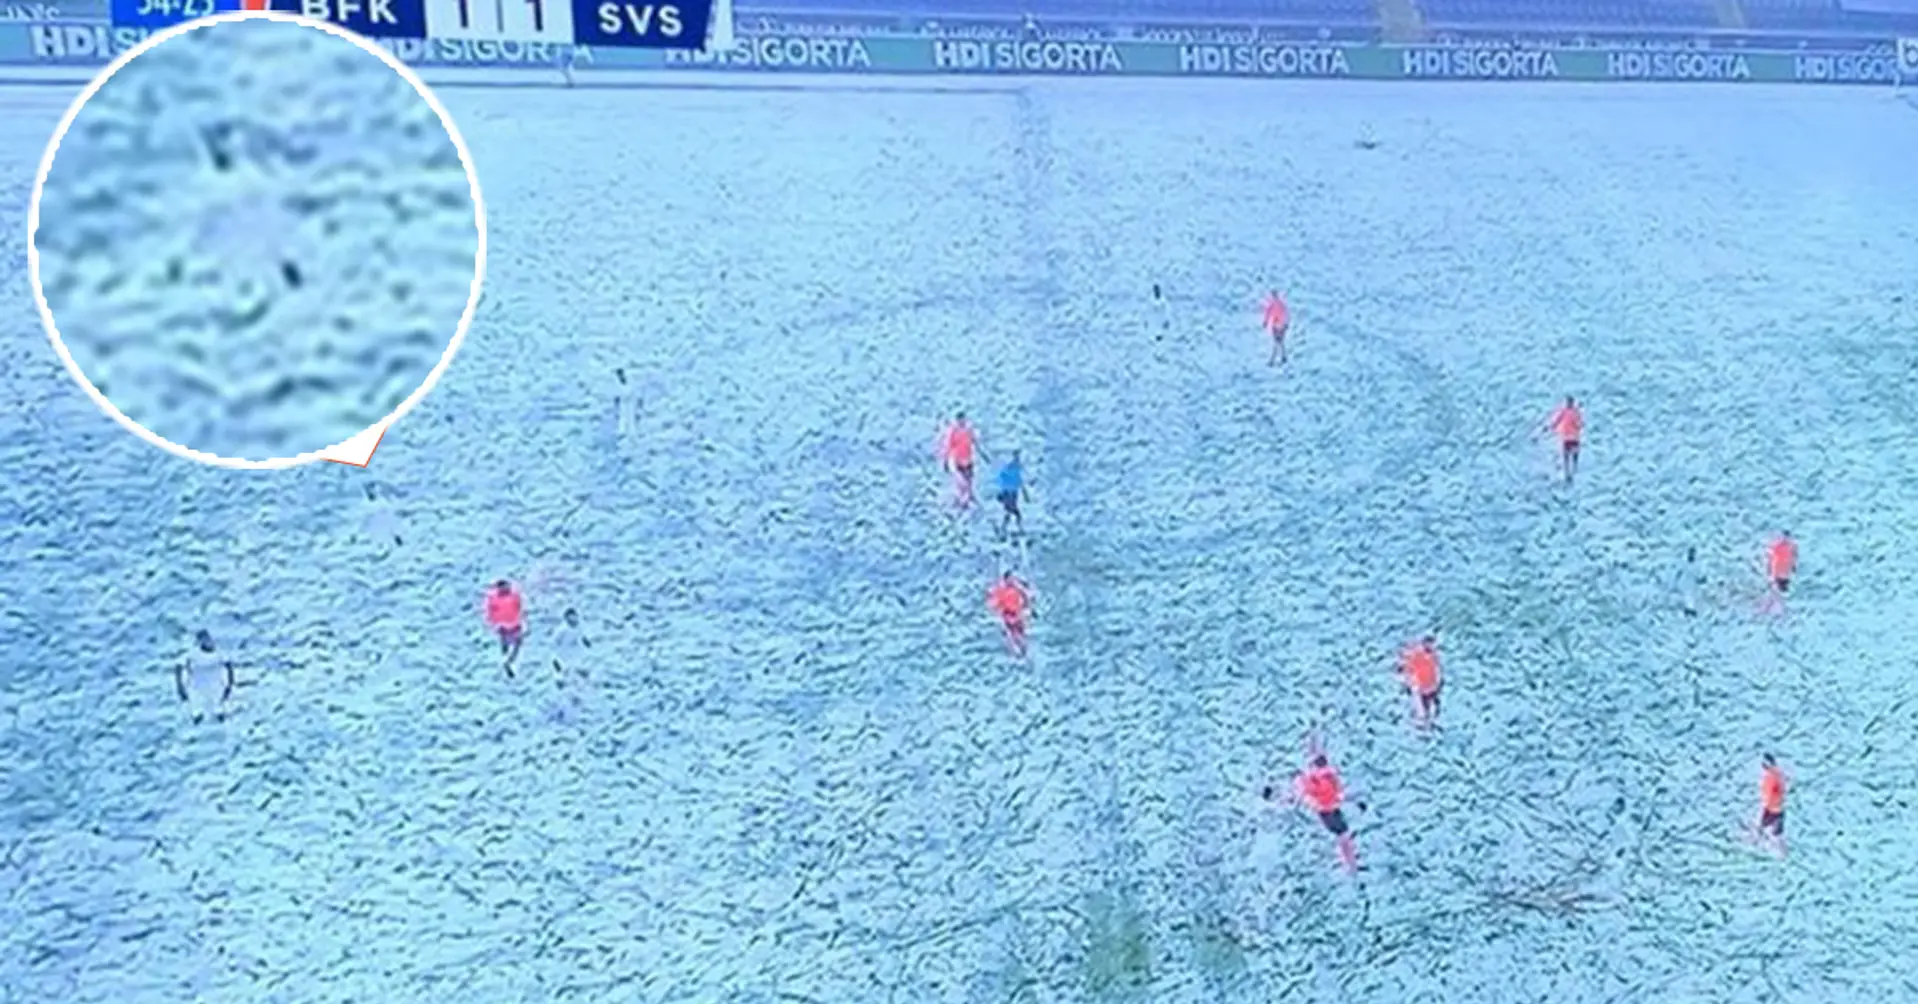 Turkish team wears white kits on a snowy day, players literally disappear